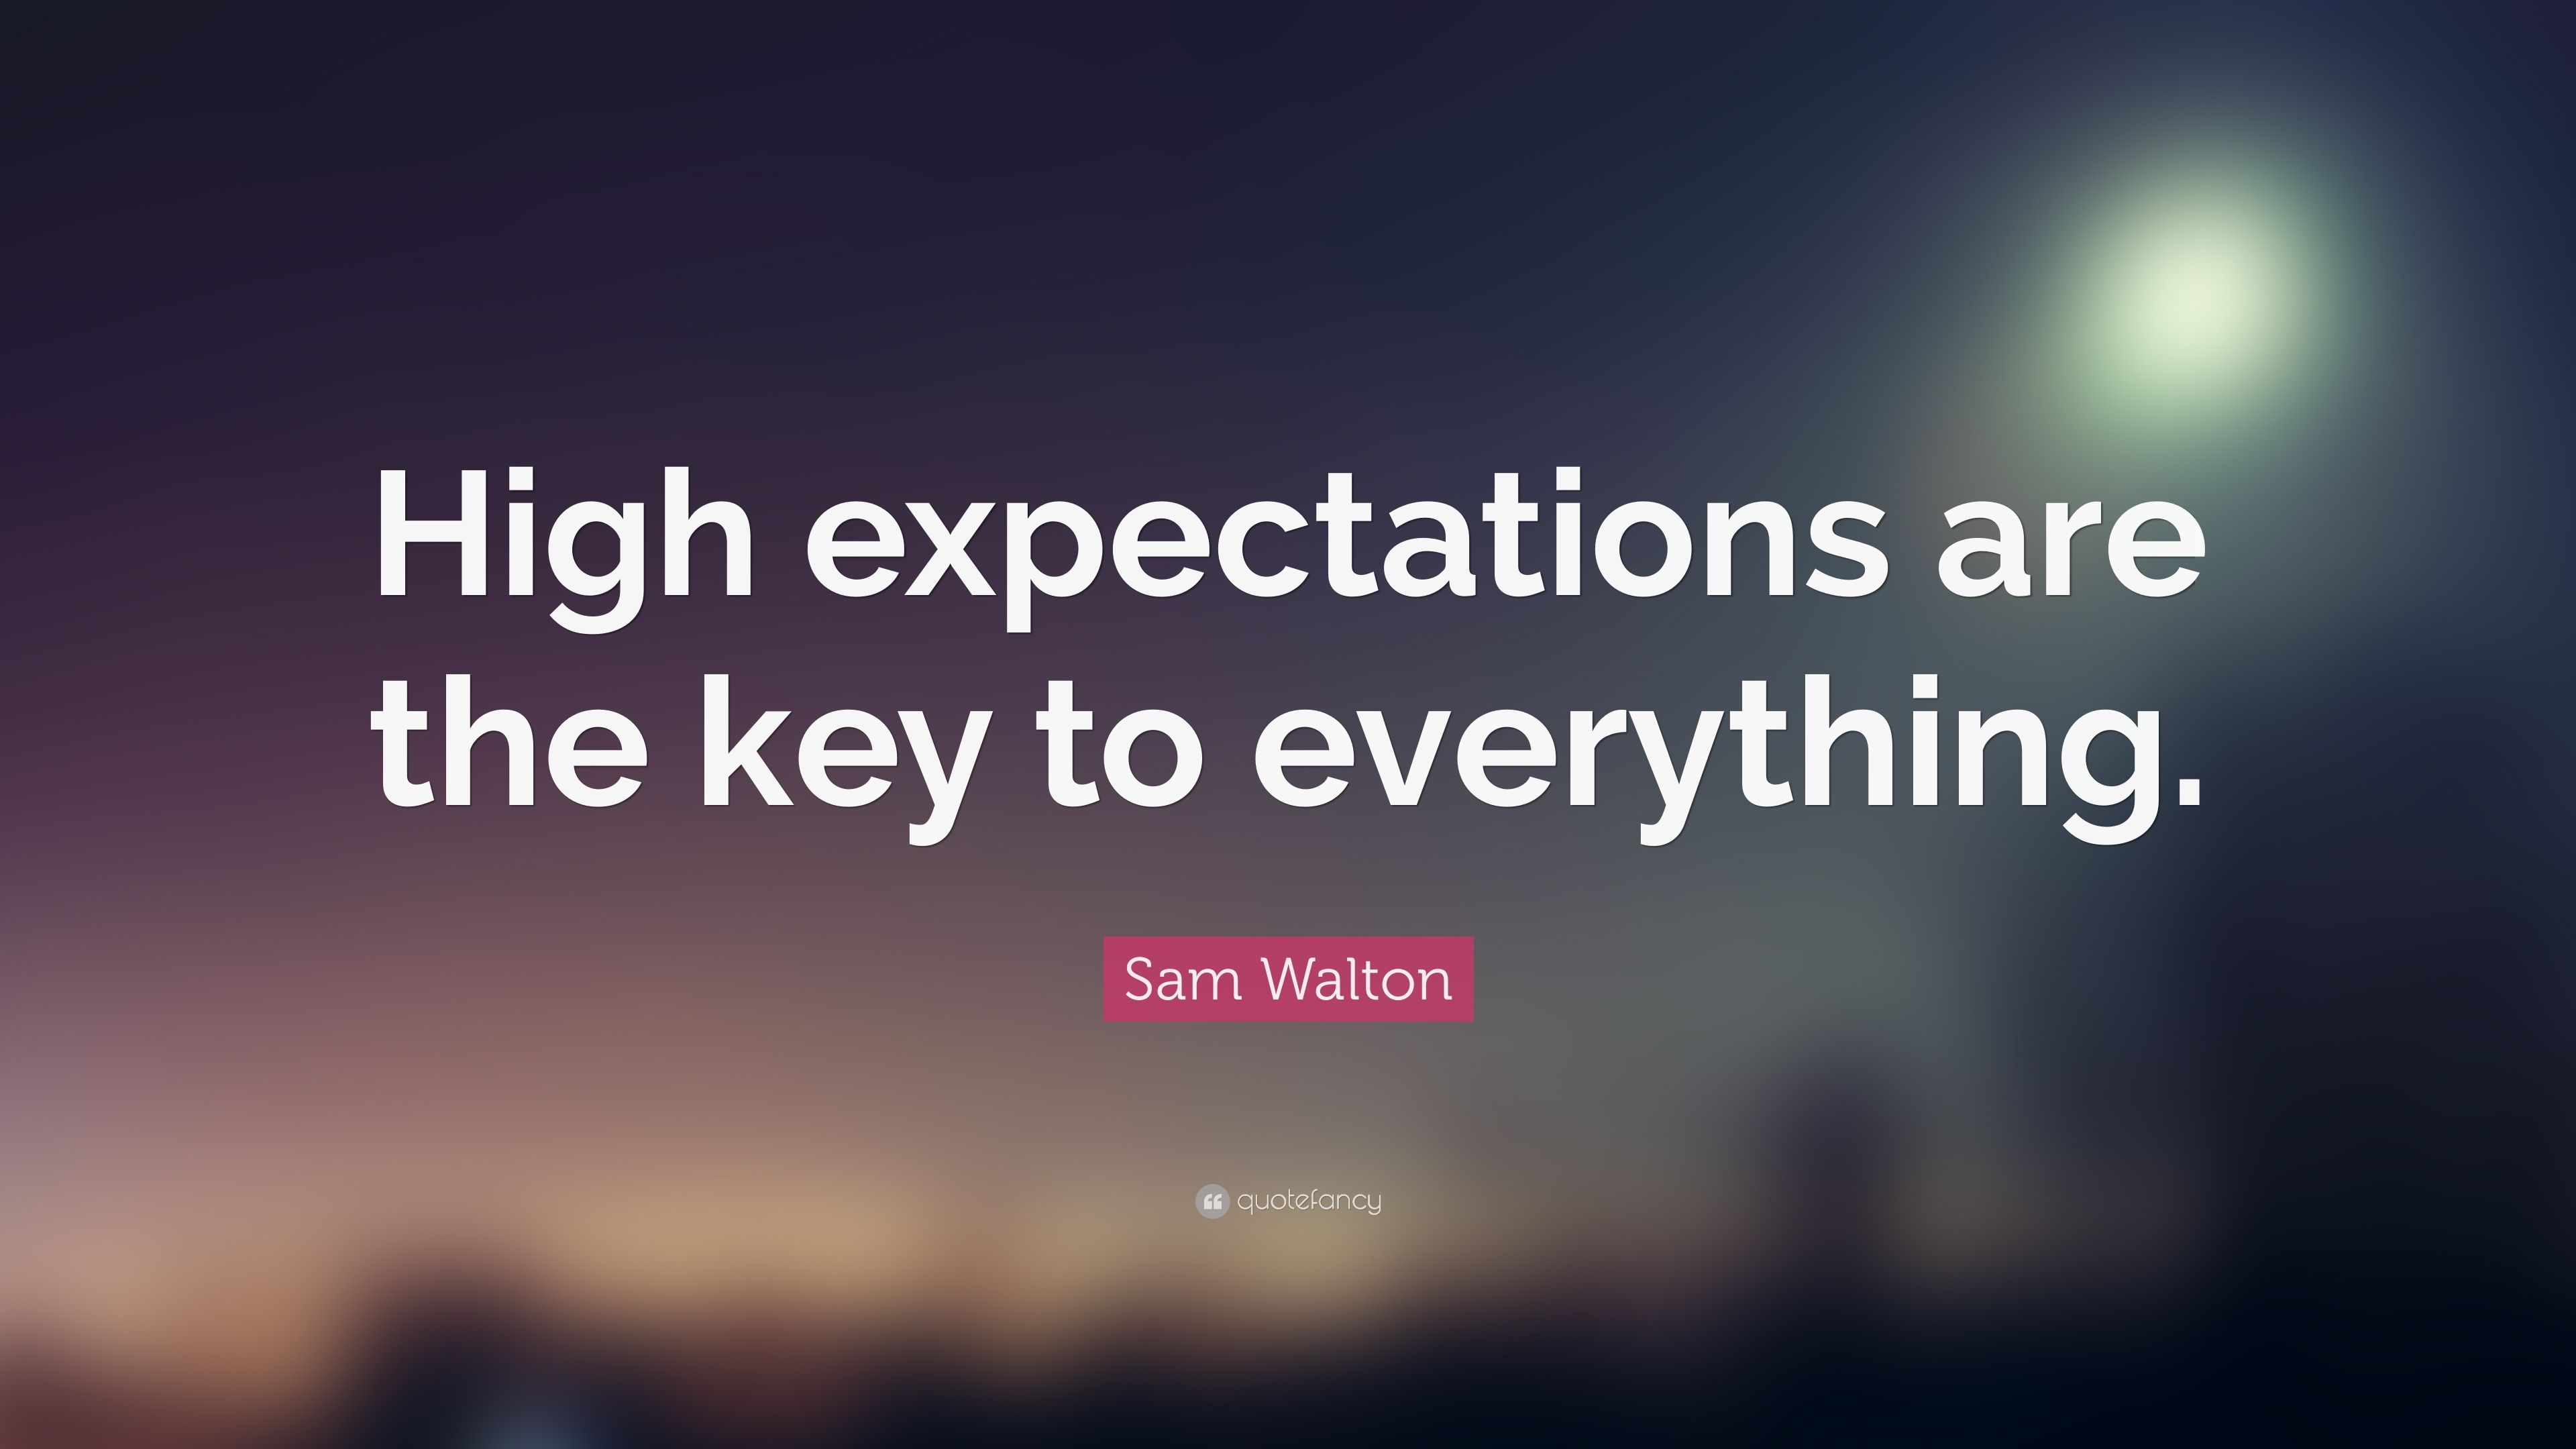 Sam Walton Quote: “High expectations are the key to everything